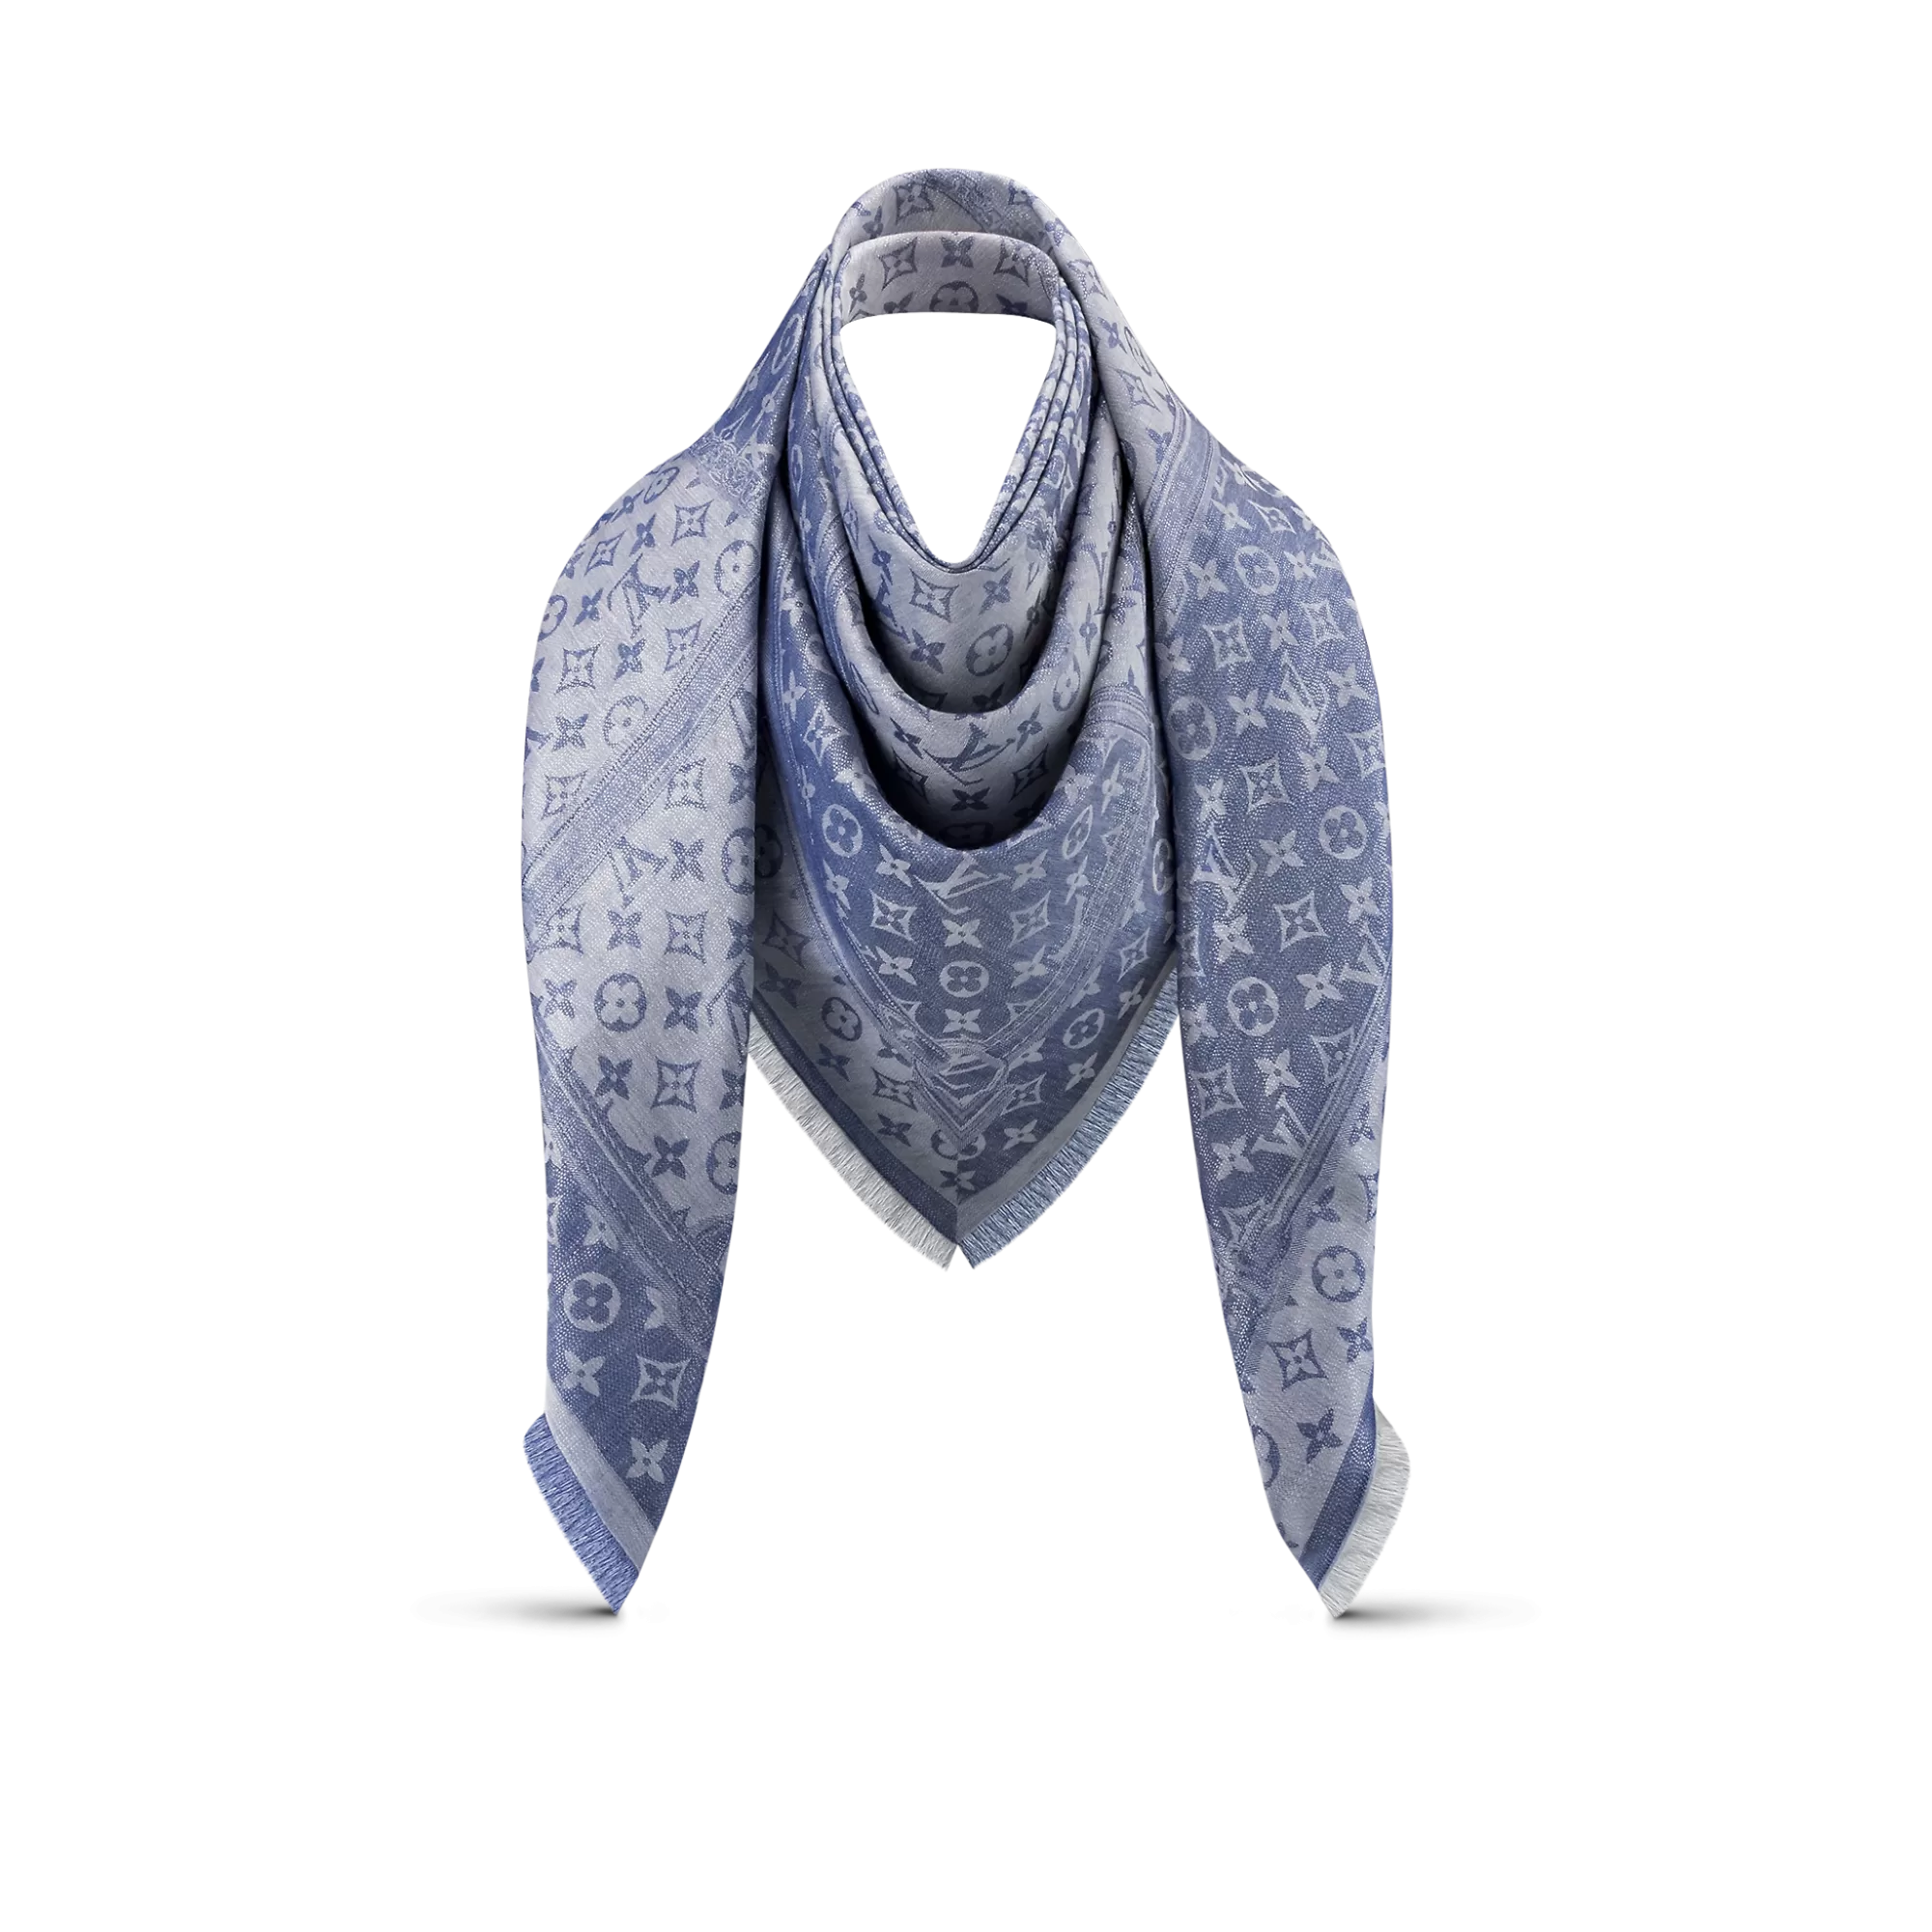 Barely there Louis Vuitton scarf. Good for people who like high